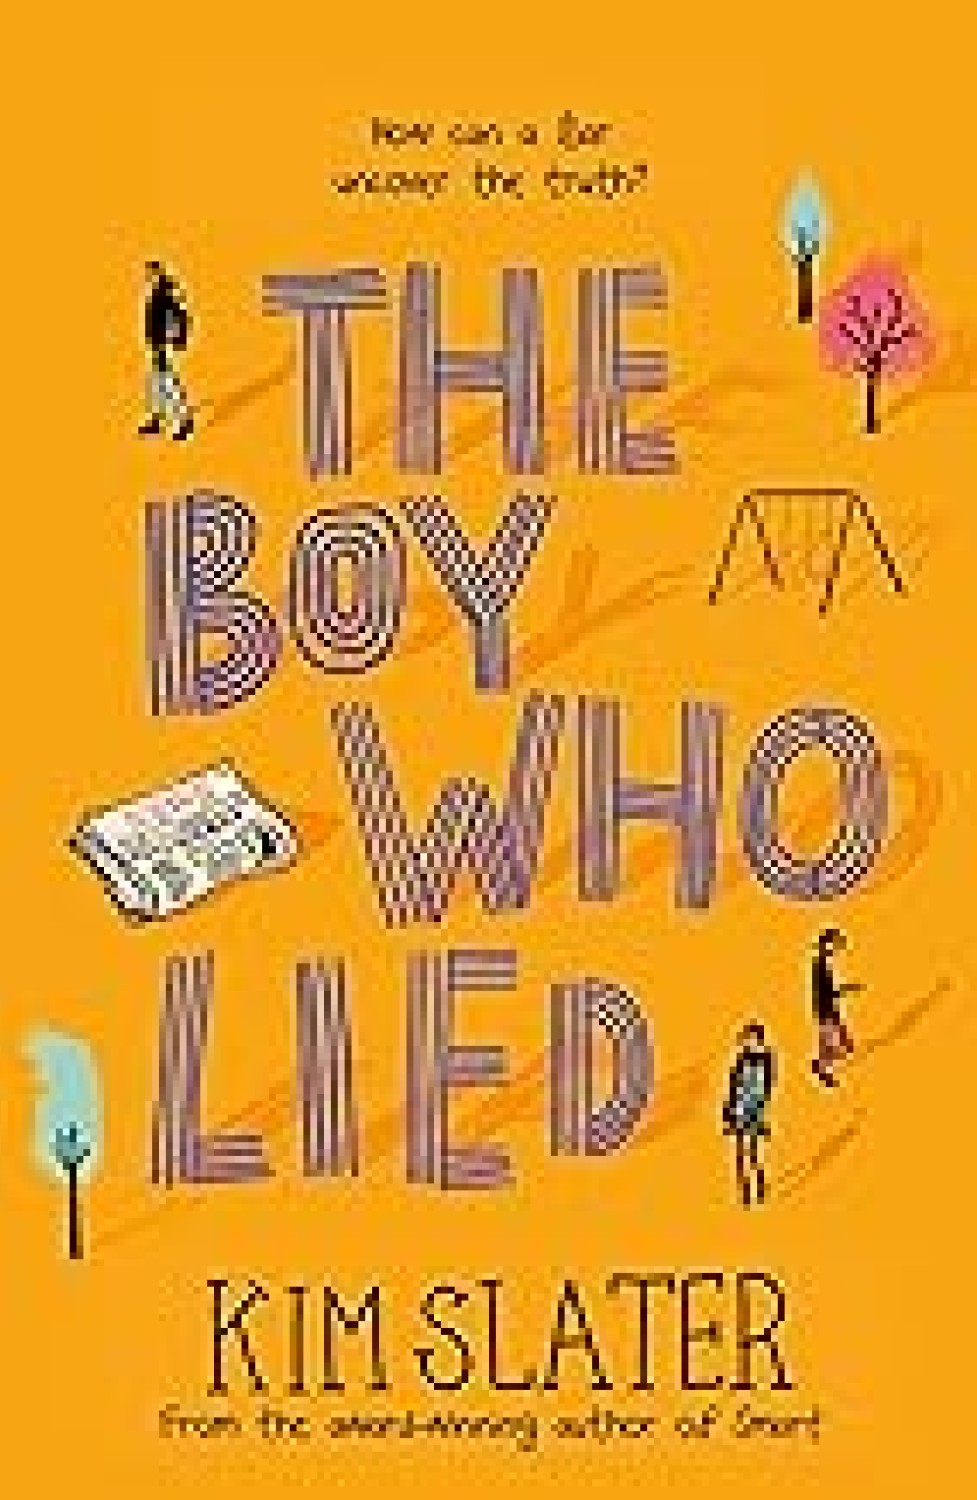 THE BOY WHO LIED